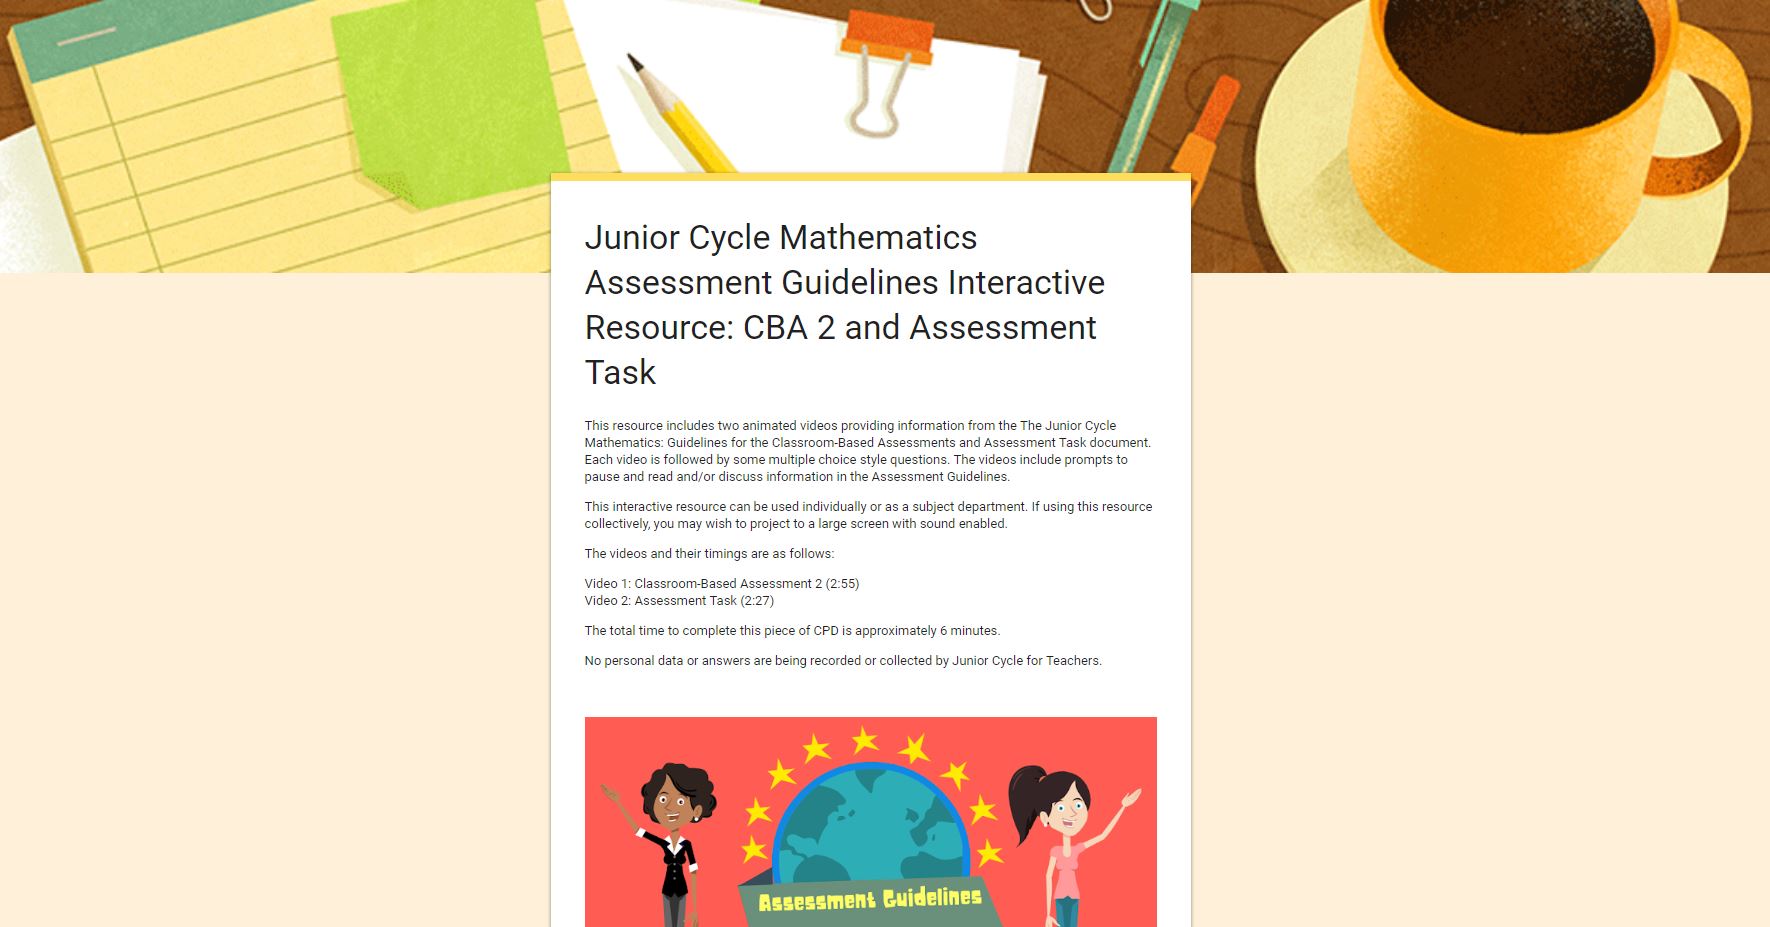 Assessment Guidelines Interactive Resource - Section Three CBA 2 and the Assessment Task